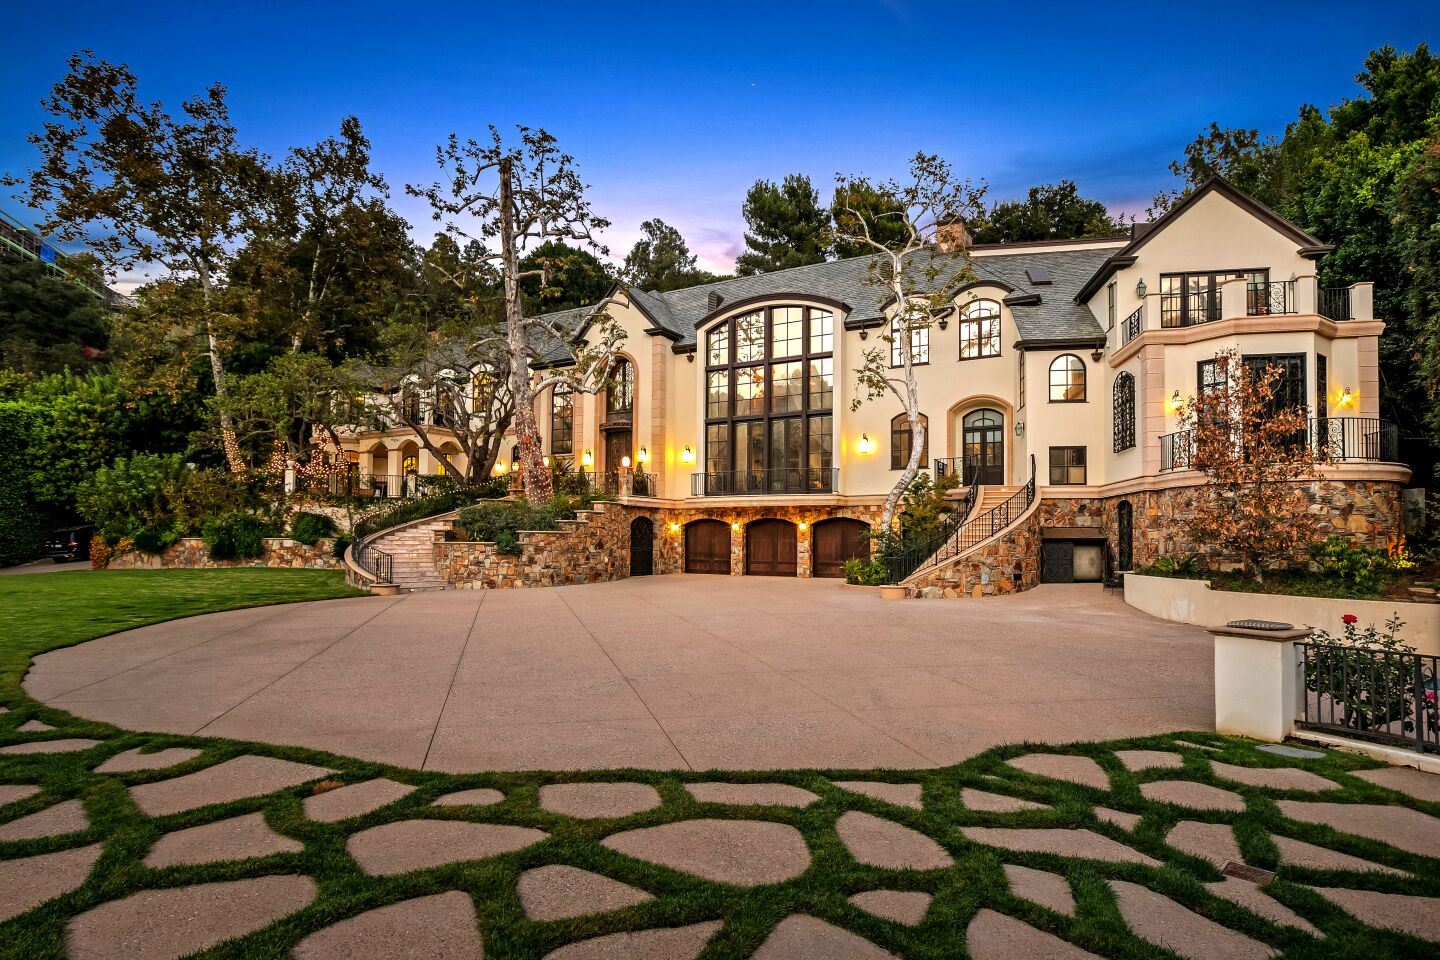 Gene Simmons' amenity-loaded mansion in Benedict Canyon spans 16,000 square feet and has a swimming pool with a 60-foot slide.